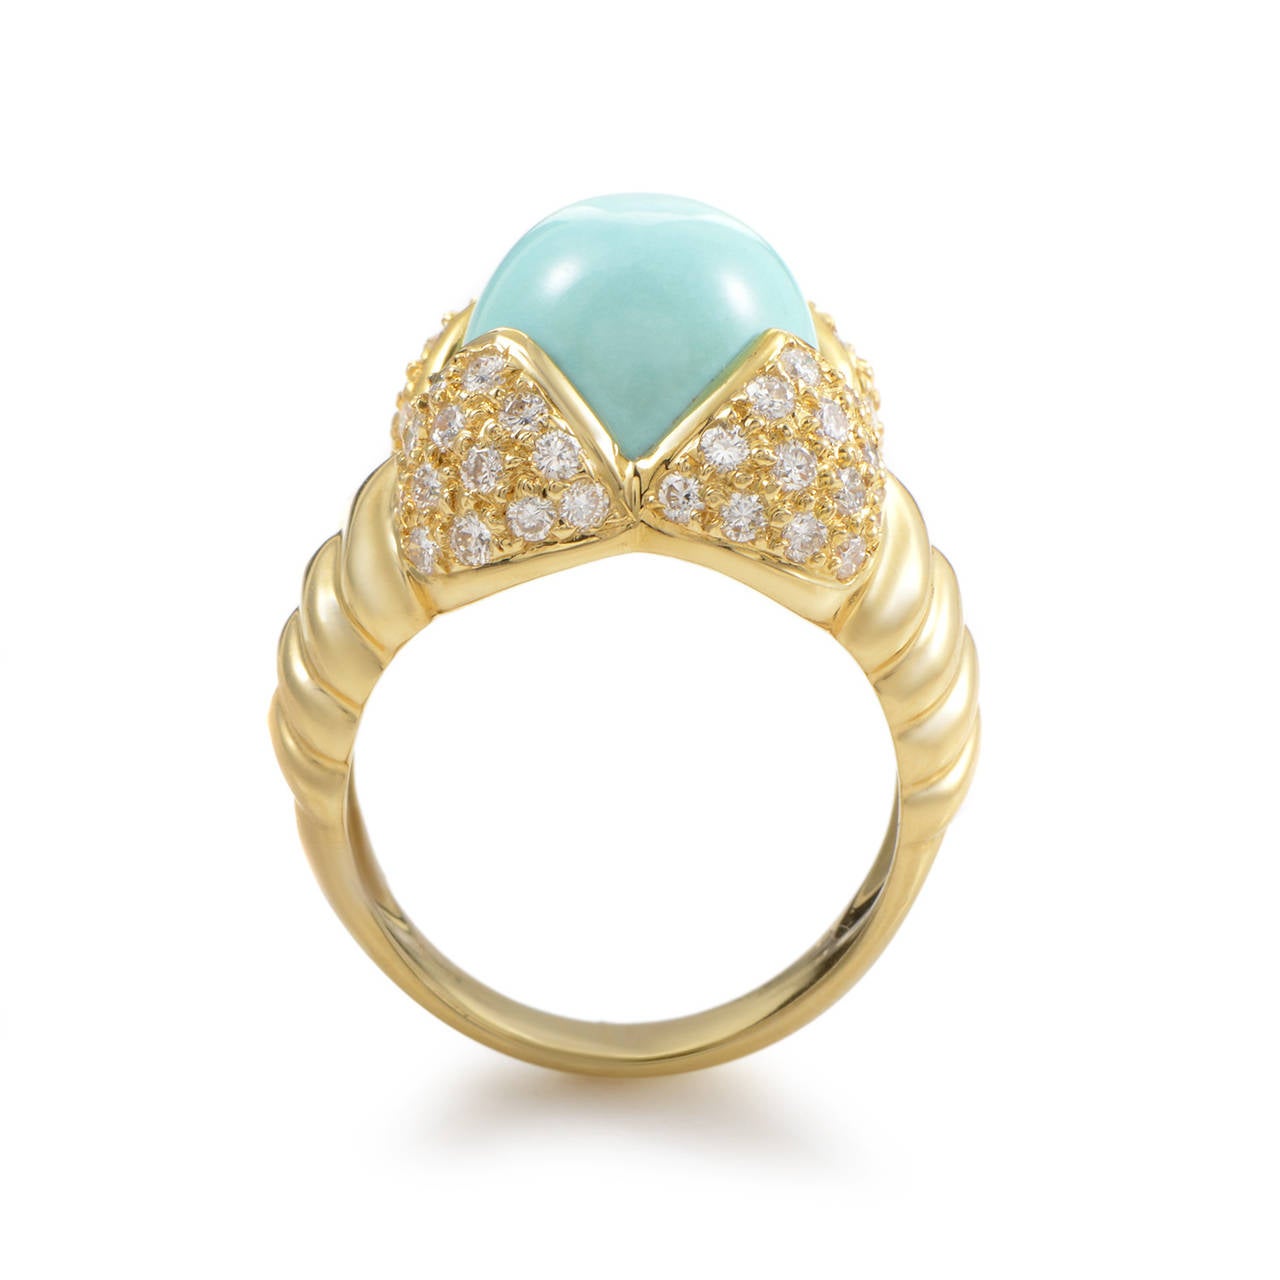 The sumptuous design of this Arrezo ring is sure to garner much attention. The ring is made of glistening 18K yellow gold and boasts shanks partially set with a pave of 1.05 carats of diamonds. Lastly, the main stone is a magnificent egg-shaped